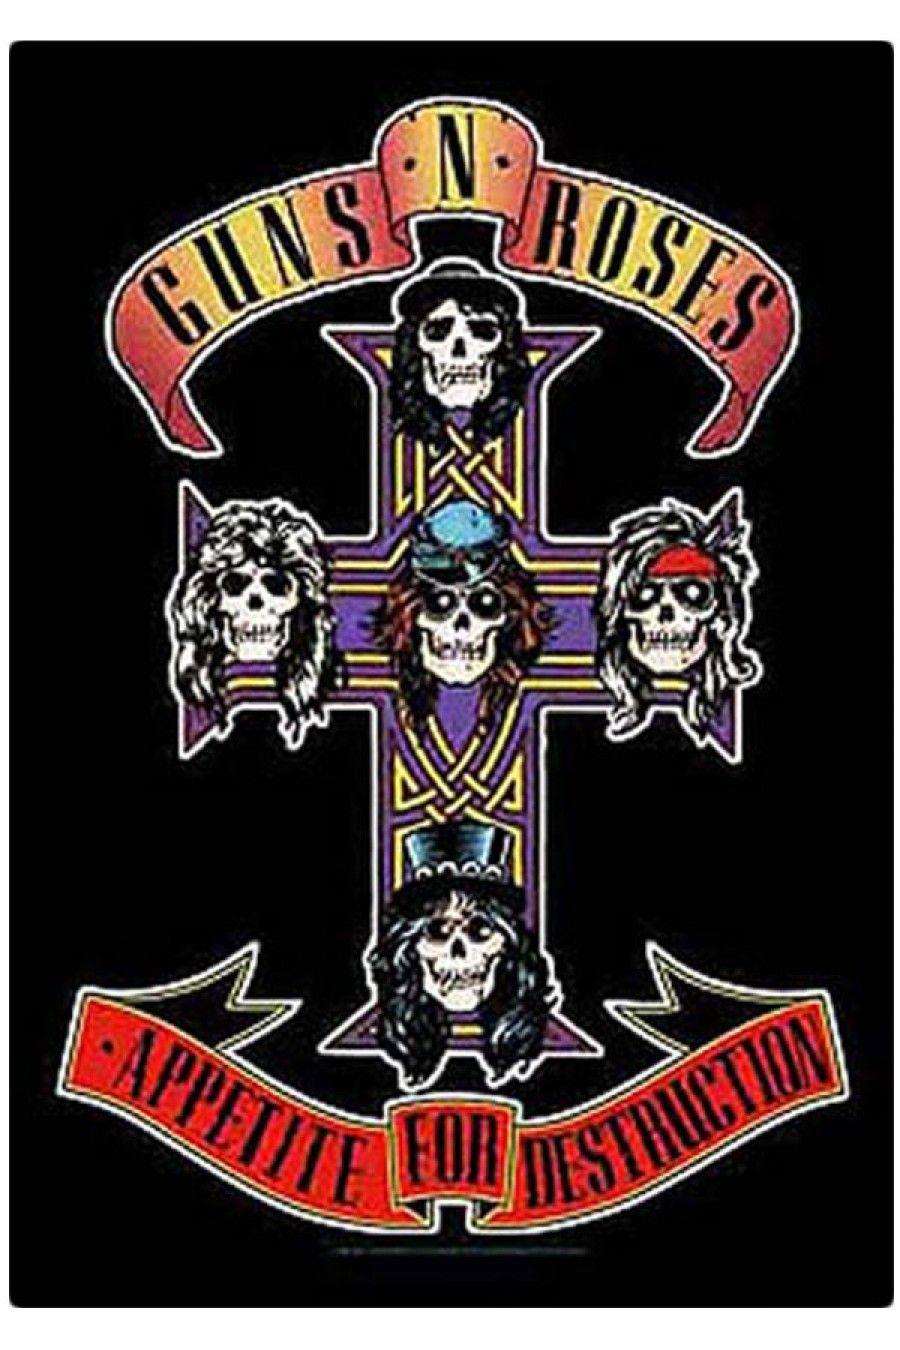 Guns and Roses Appetite for Destruction Logo - Hey it's Steven Adler from Guns N' Roses here today with my mom ...